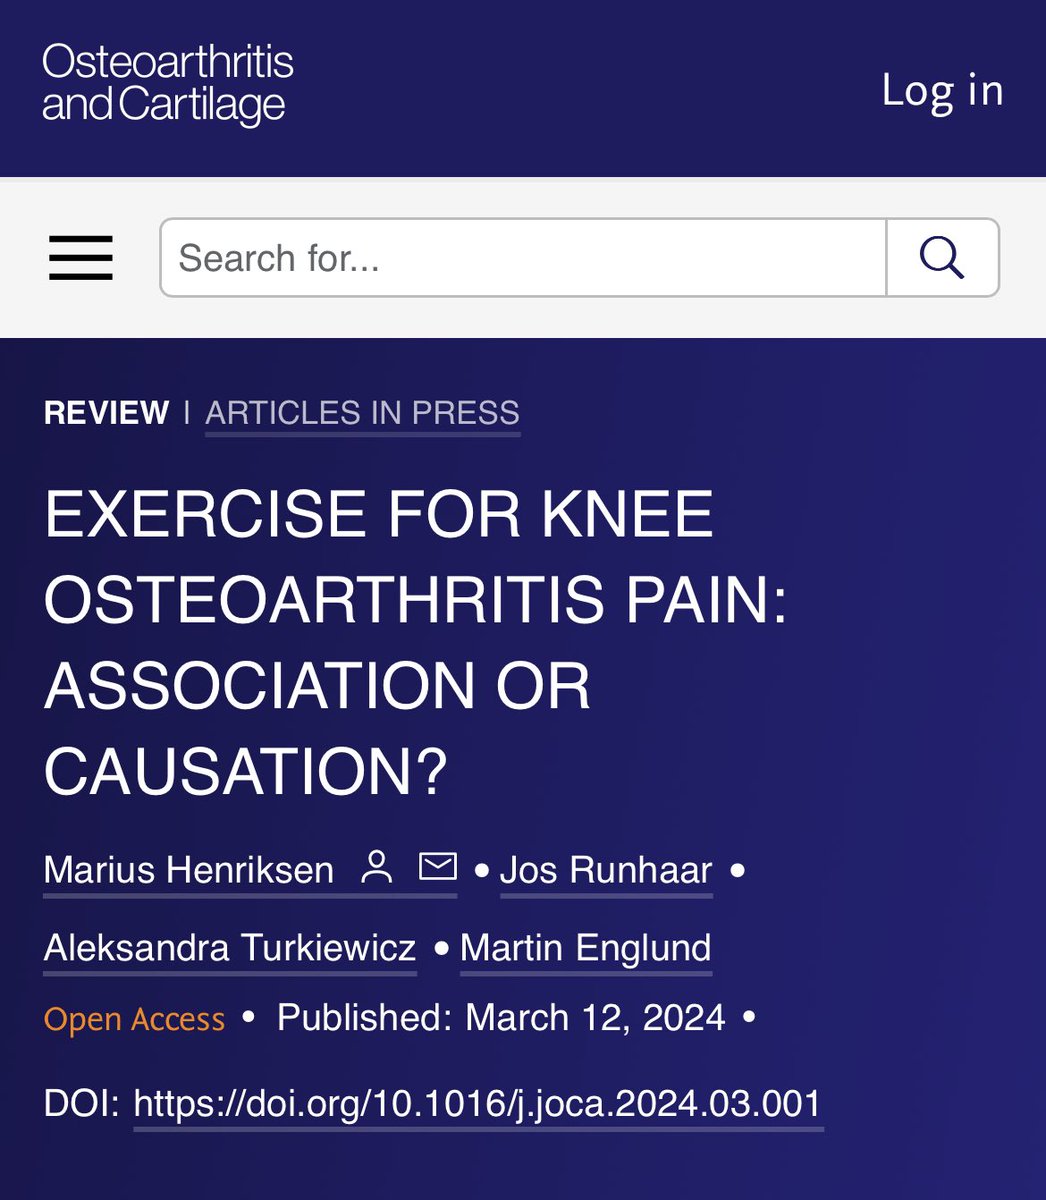 Review: Viewing the evidence from the 9 Bradford Hill considerations did neither bring forward indisputable evidence for nor against the causal relationship between exercise and improved knee OA pain. oarsijournal.com/article/S1063-… @OARSInews @ORSsociety @OARSI_ECI